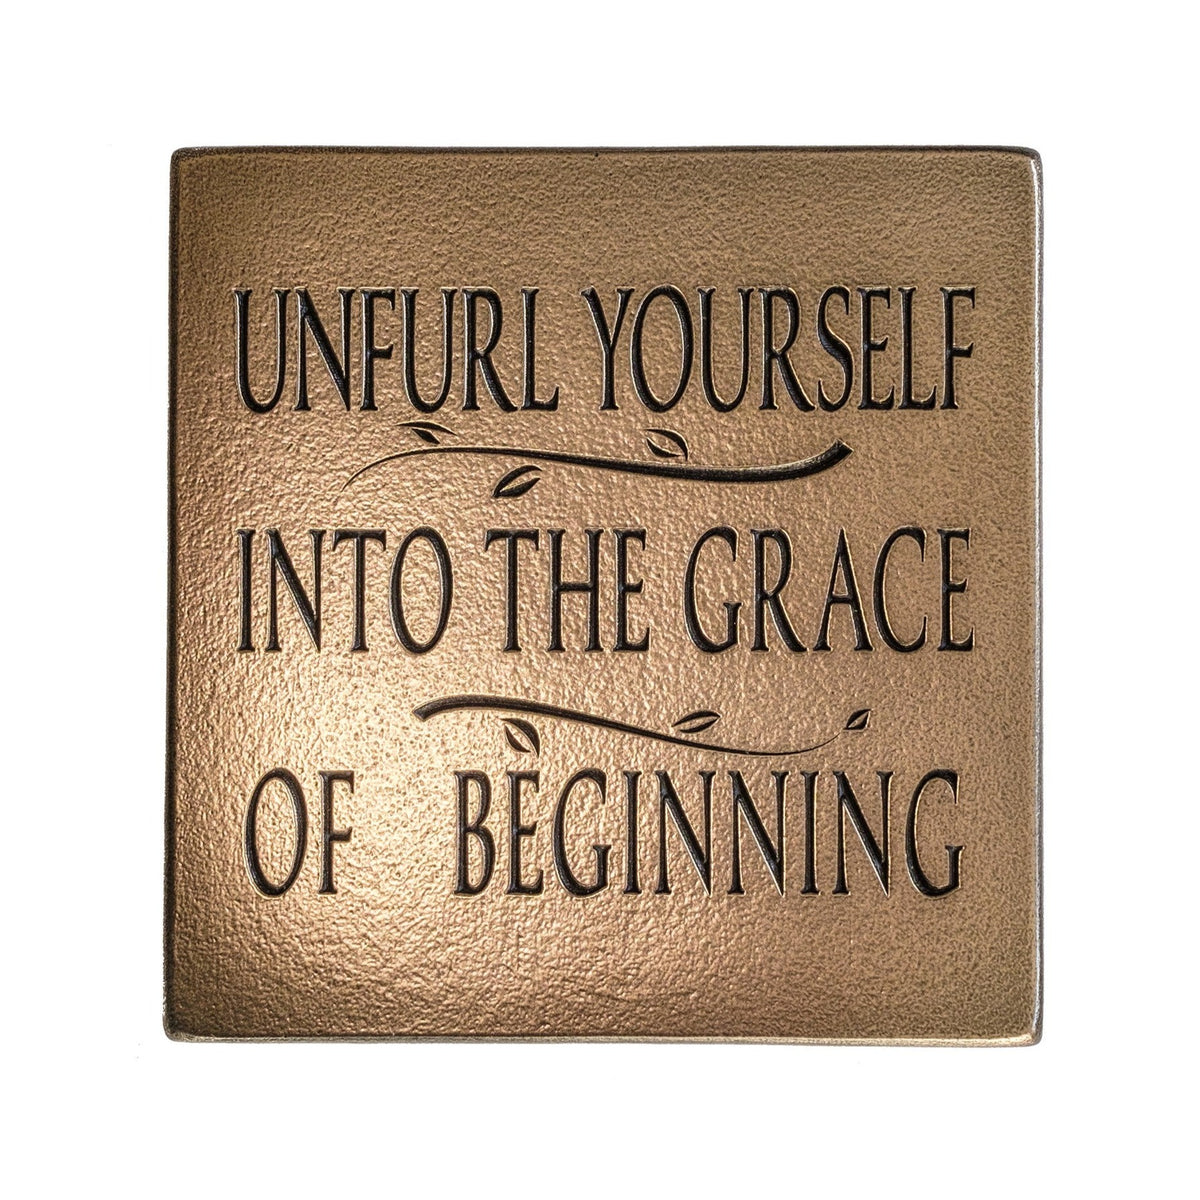 Unfurl yourself into the grace of beginning